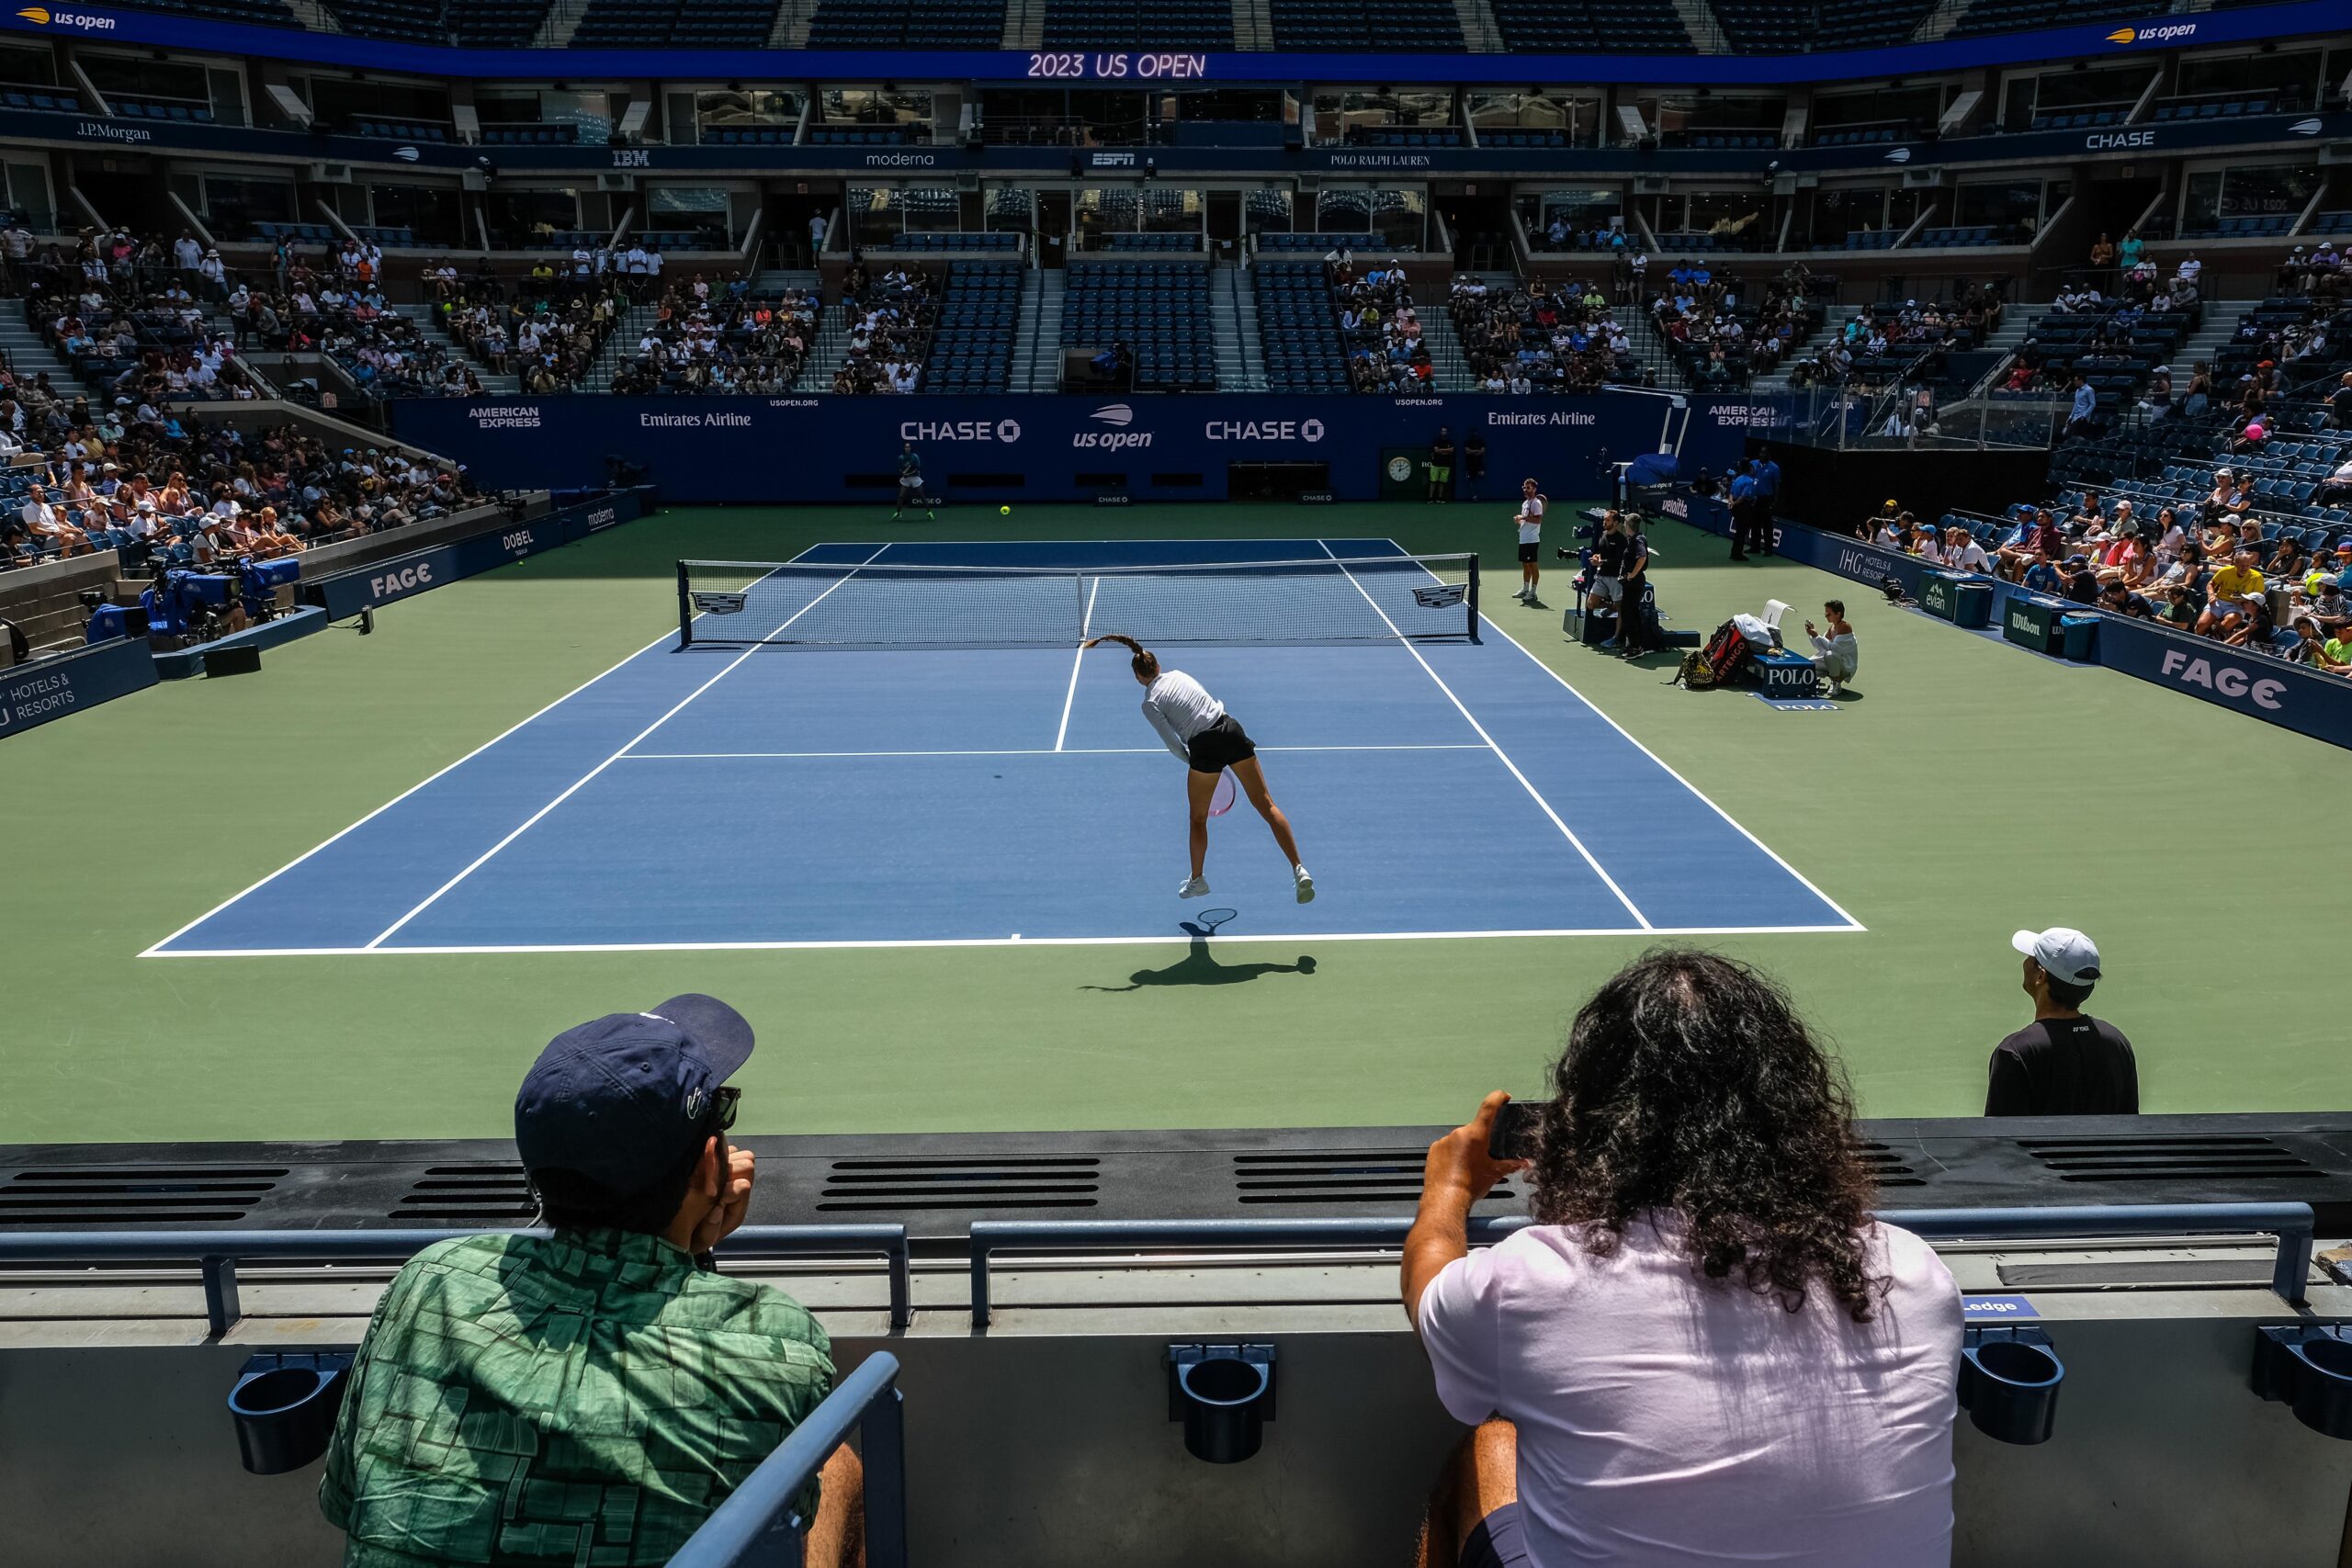 A beginners guide to the free, festive Fan Week at the US Open